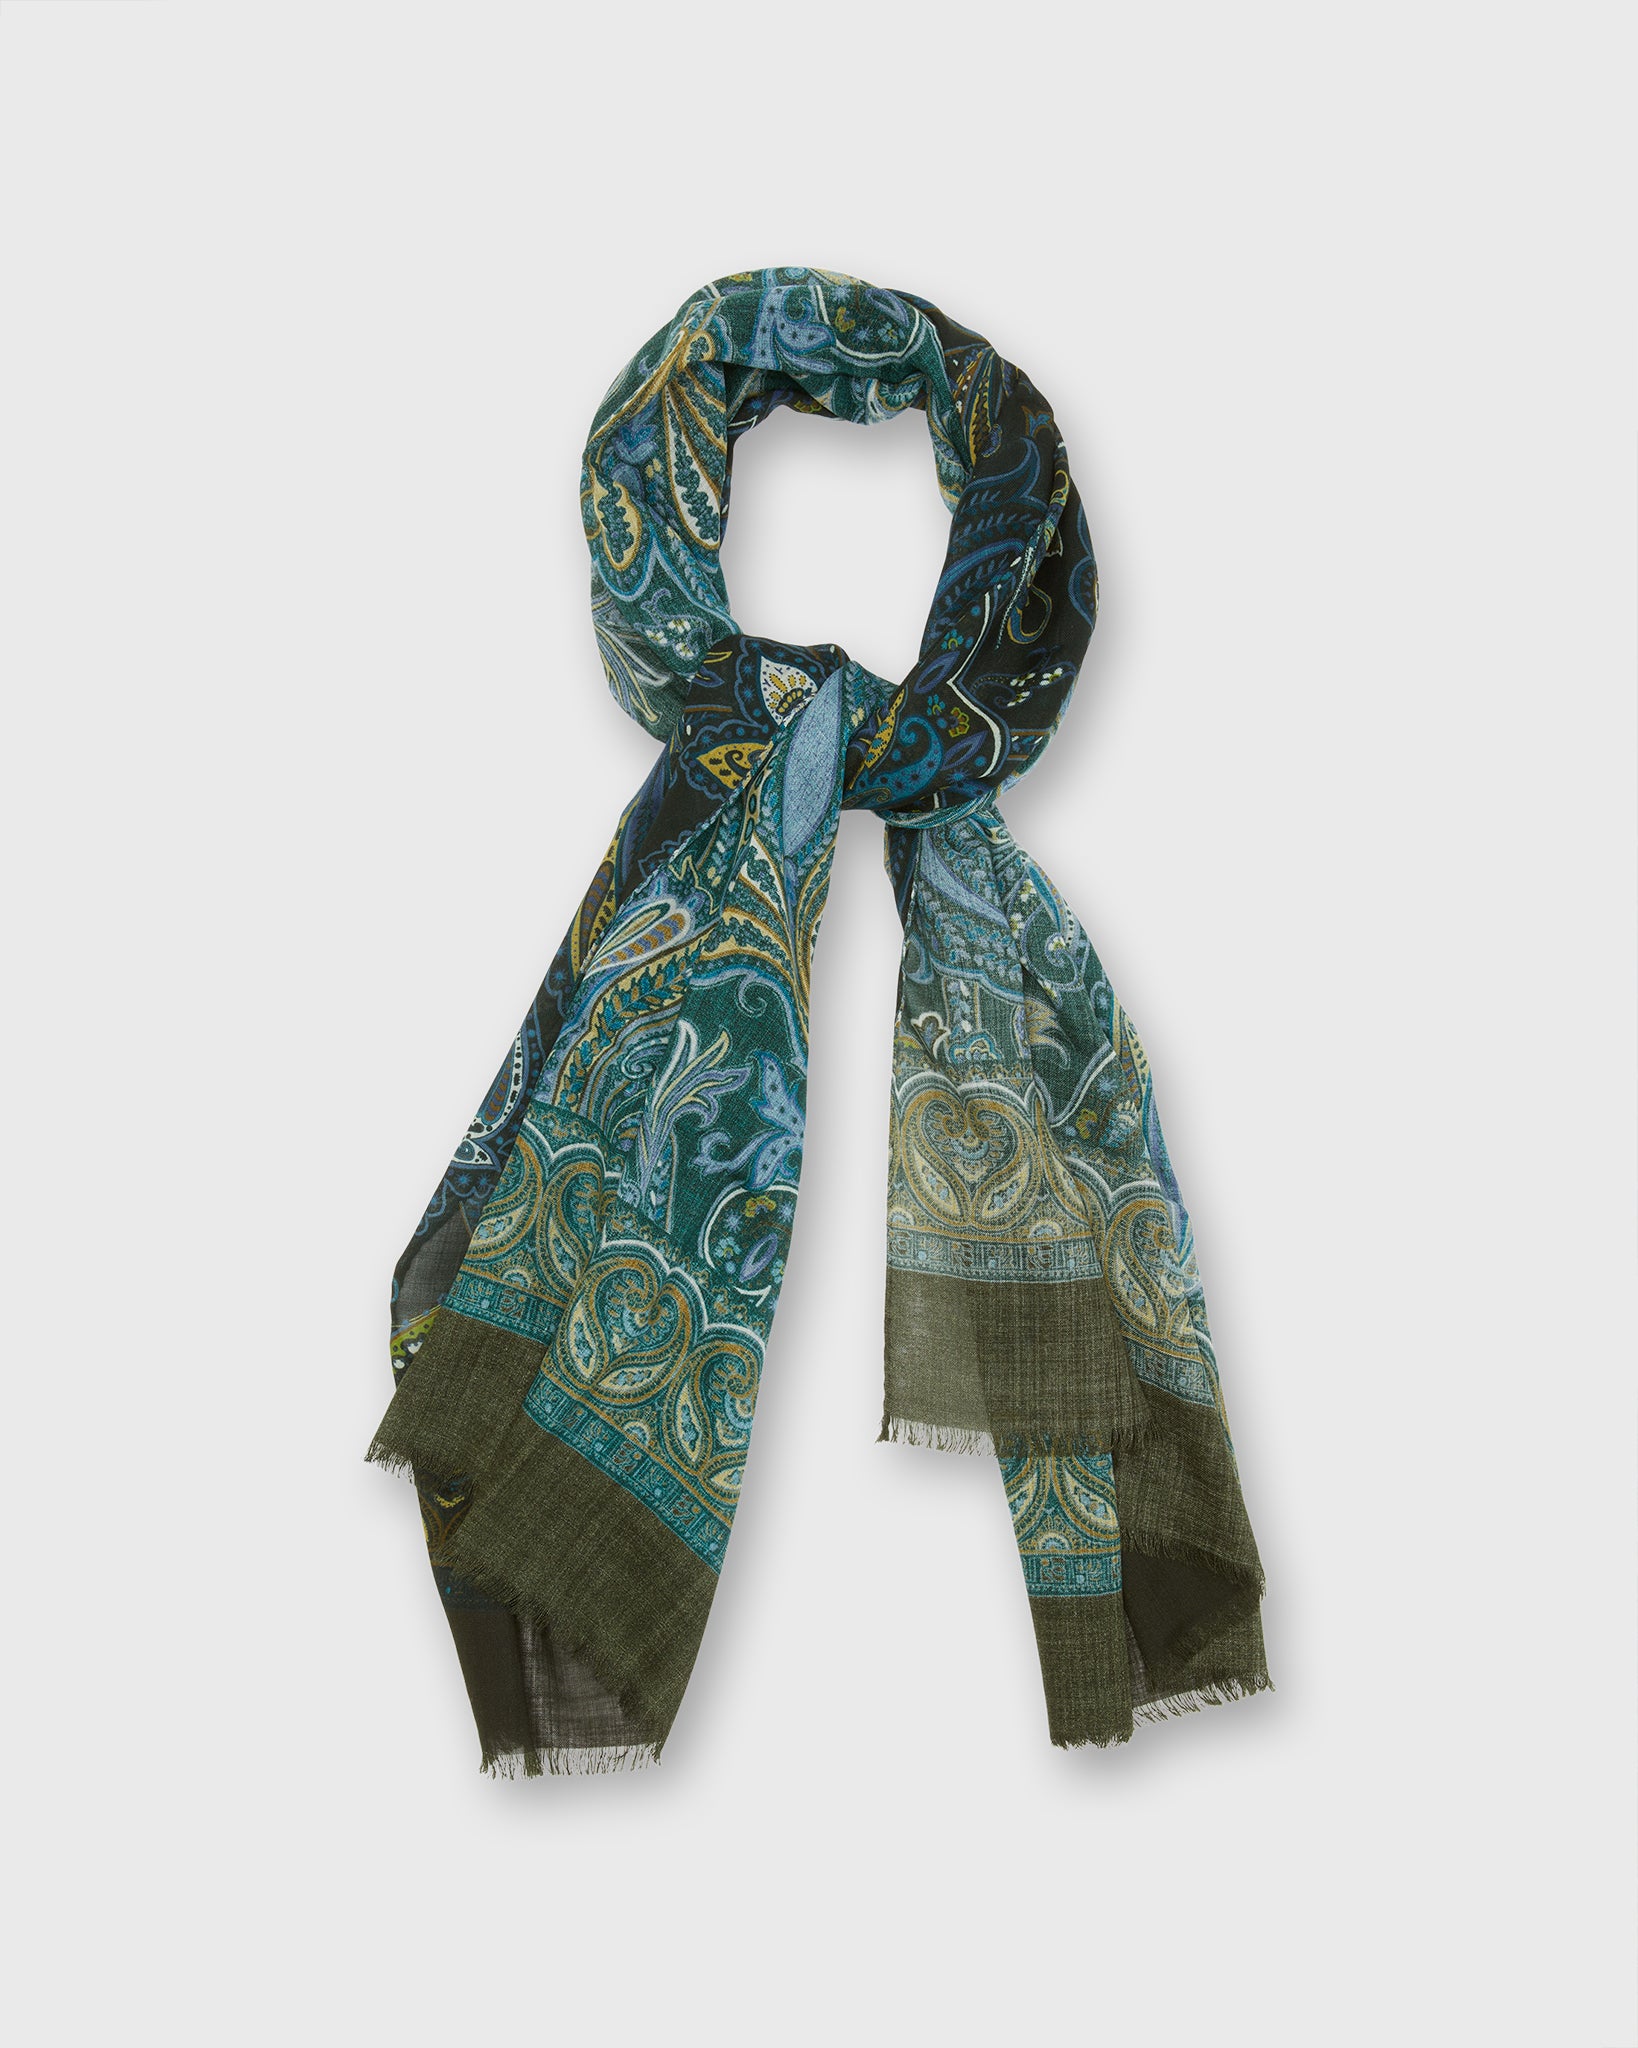 Wool/Cashmere Print Scarf in Green/Spruce Mosaic